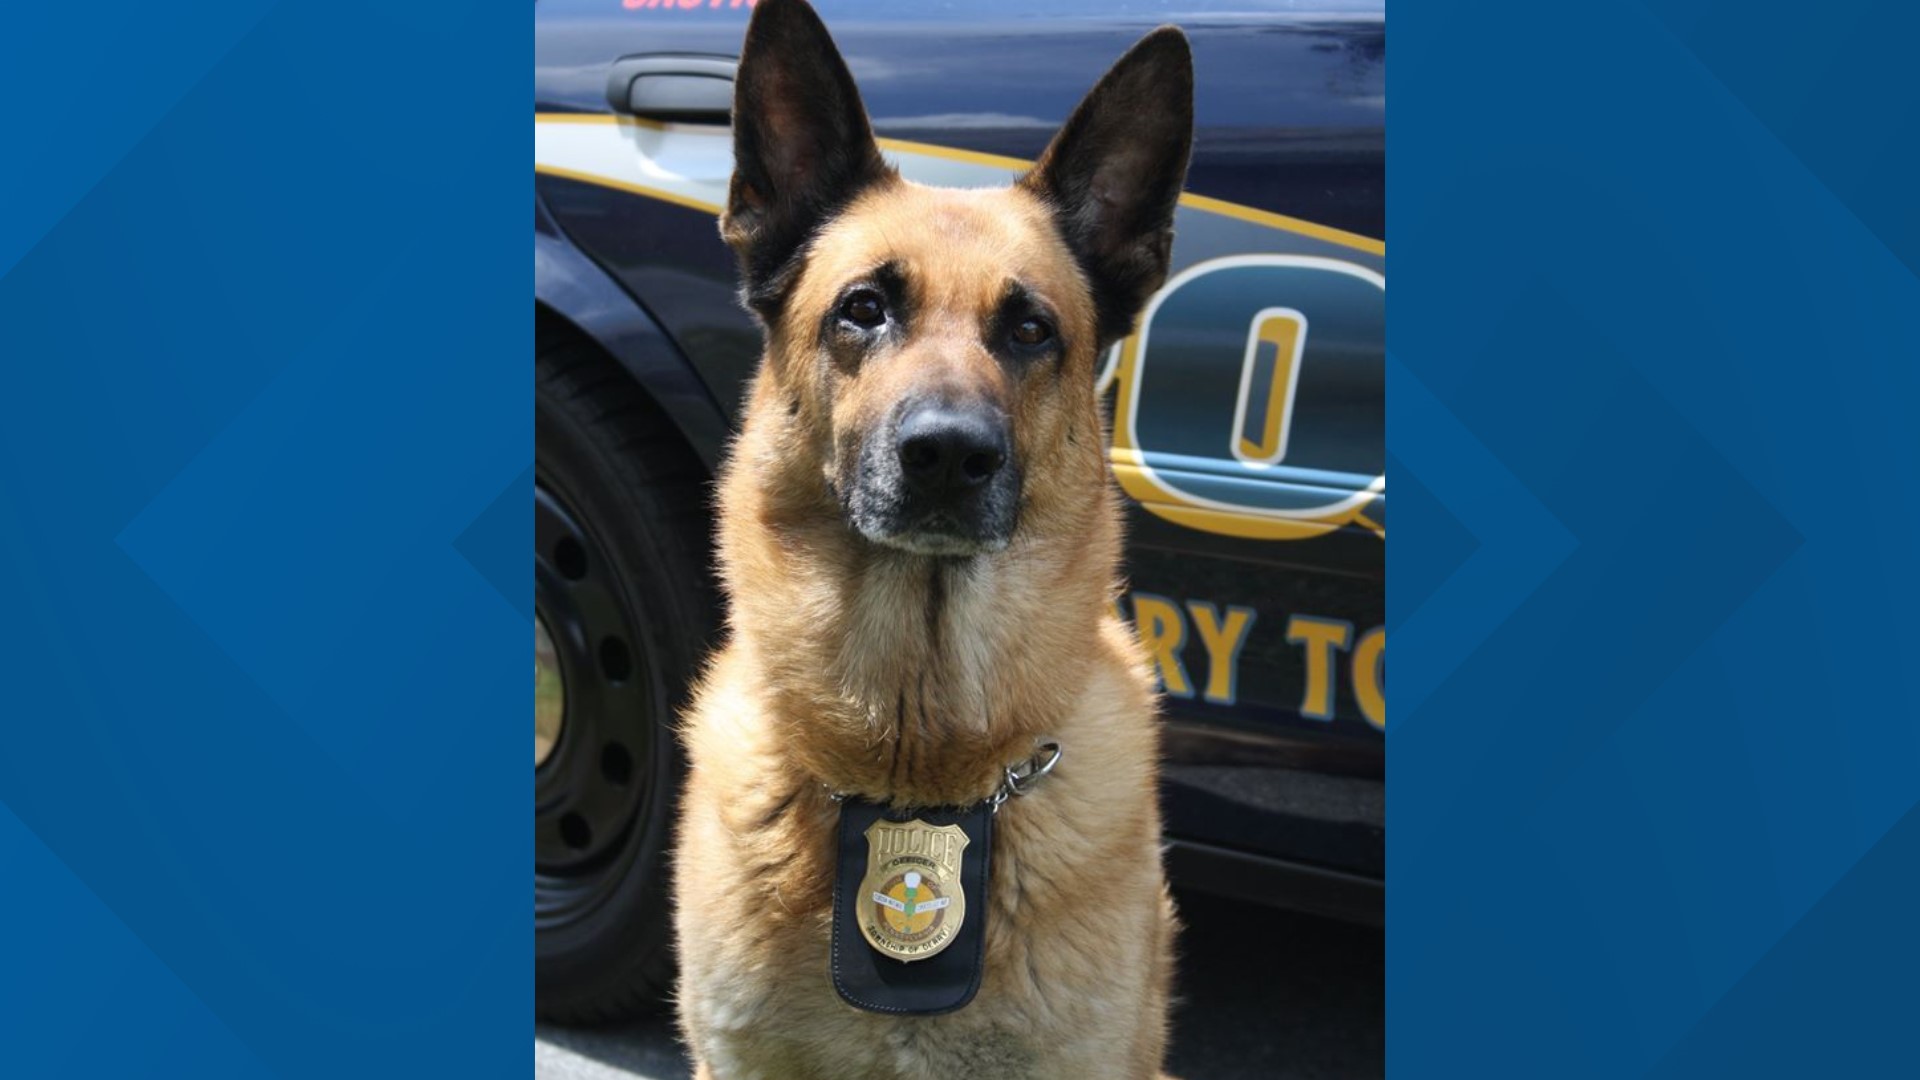 Retired Derry Township Police K9 Officer Chico Has Died Department Says